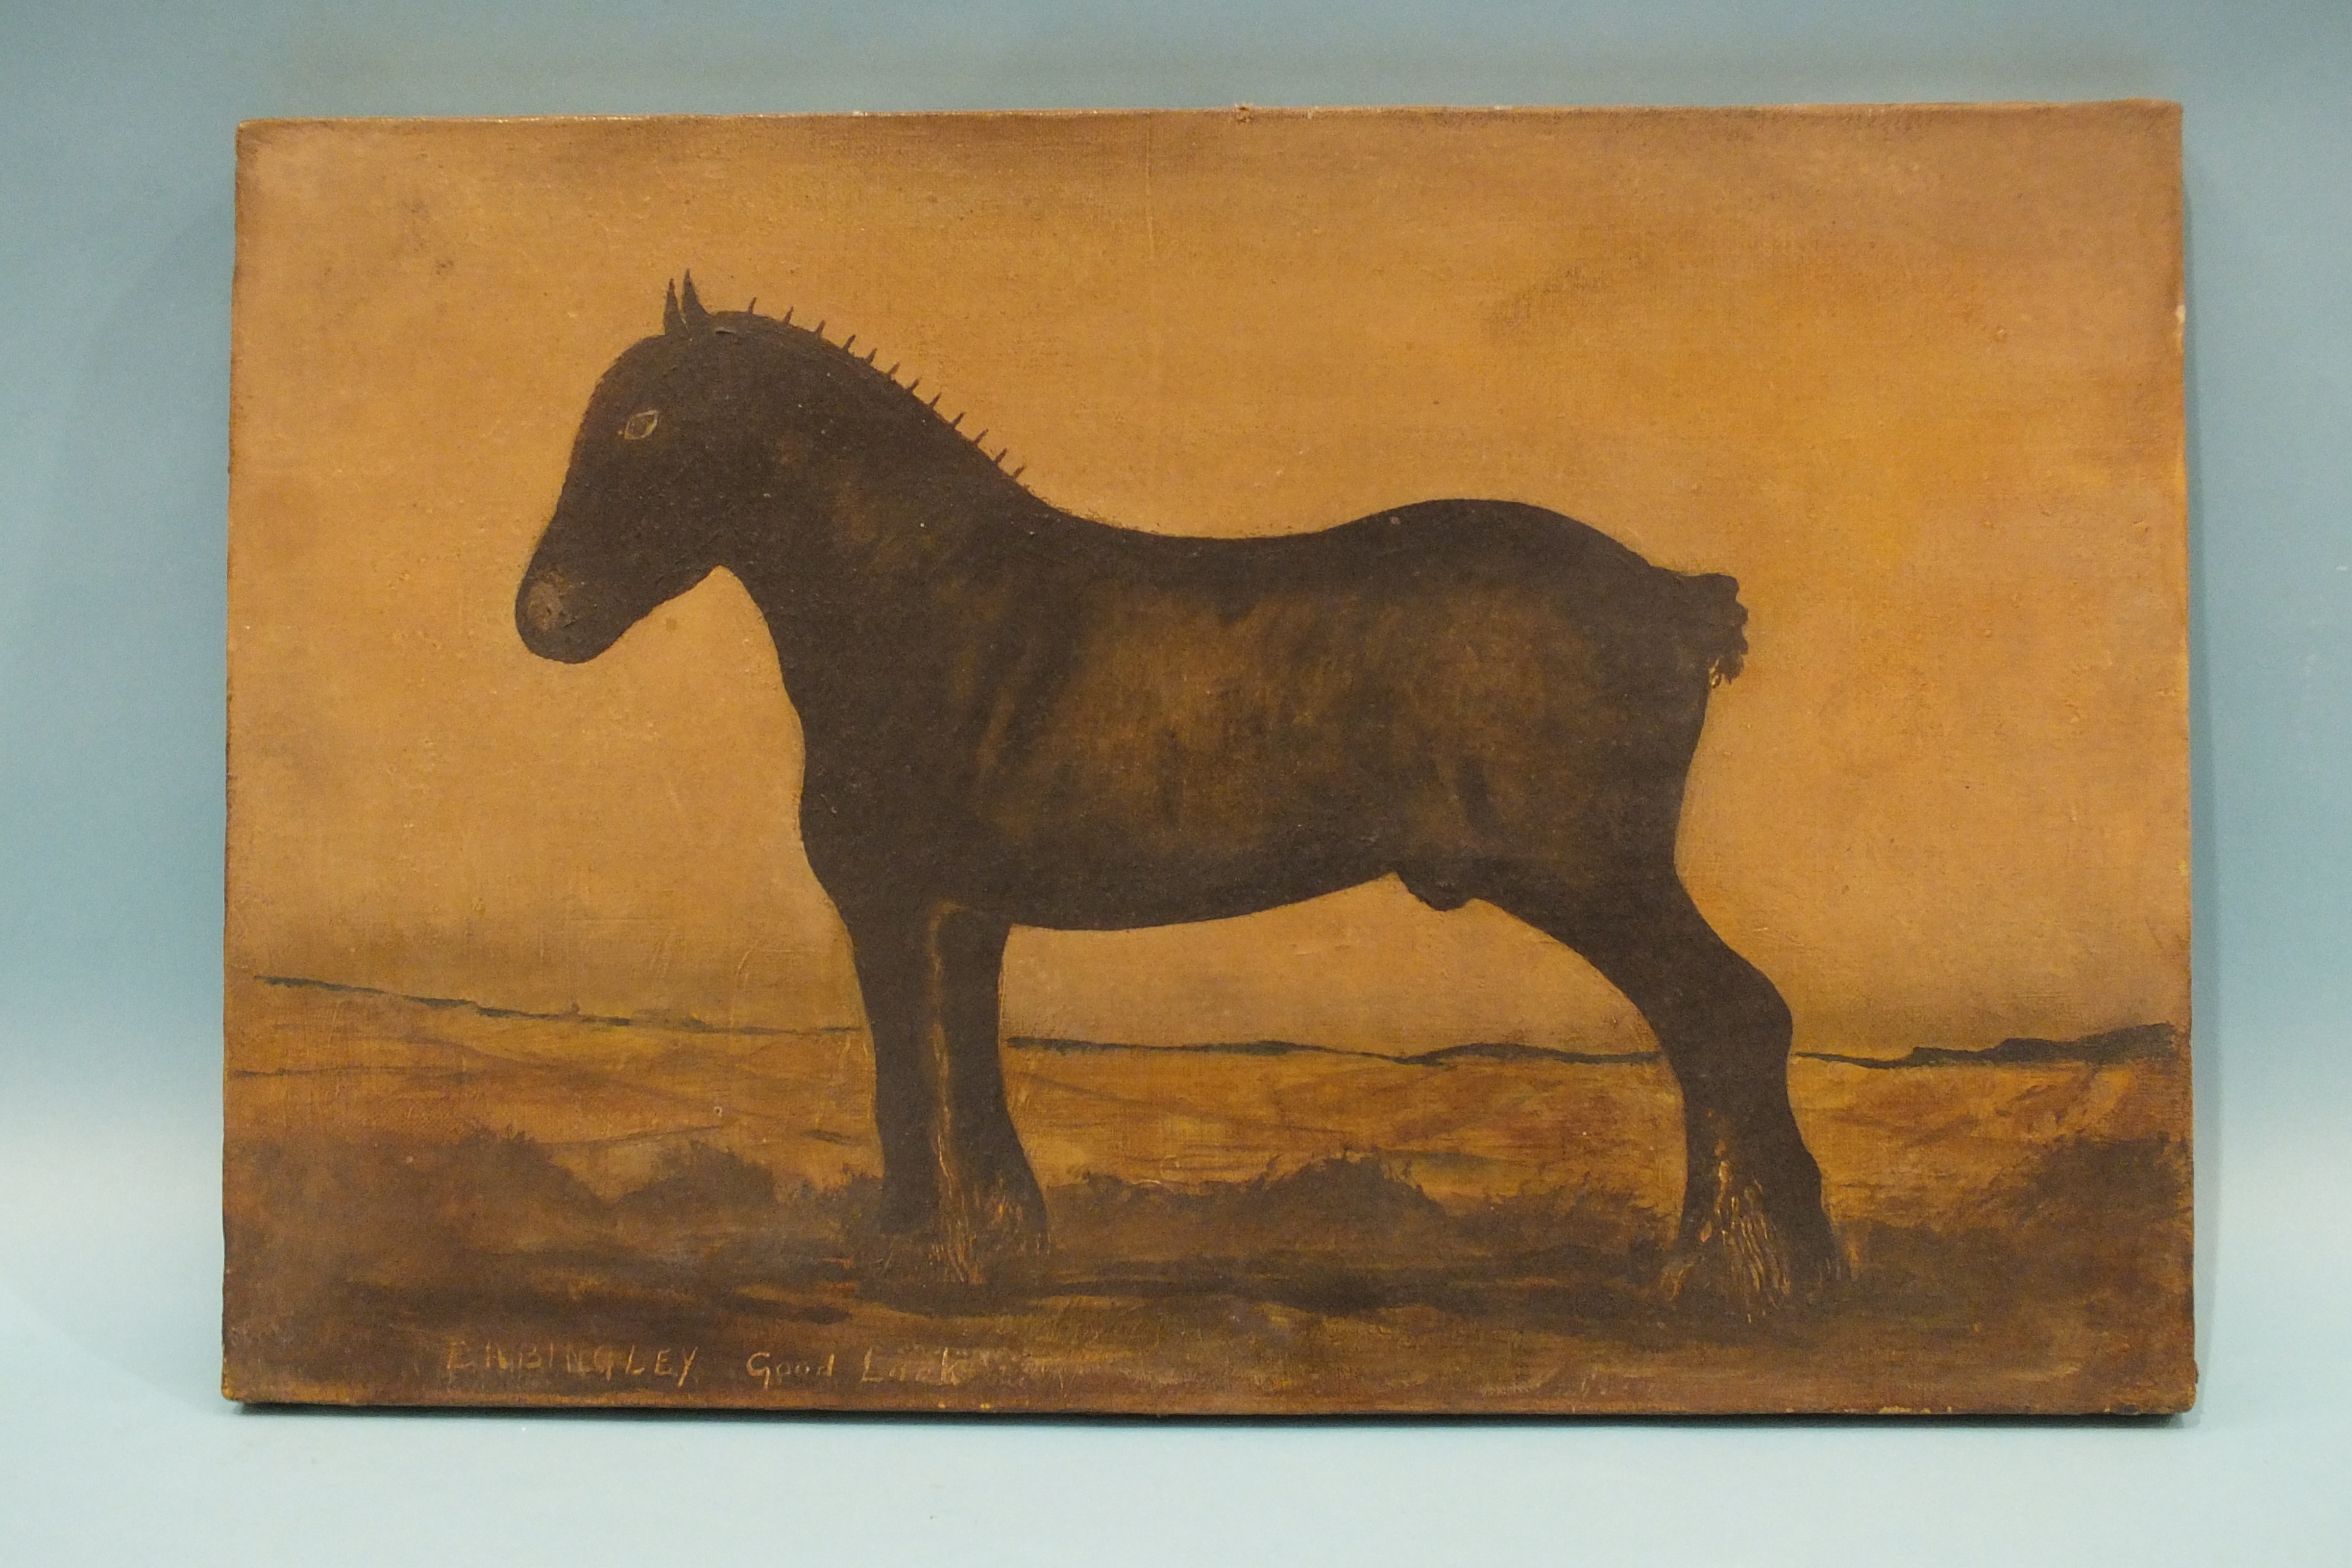 19th century Naïve School STUDY OF A WORKING HORSE IN A LANDSCAPE Oil on canvas, inscribed 'E A